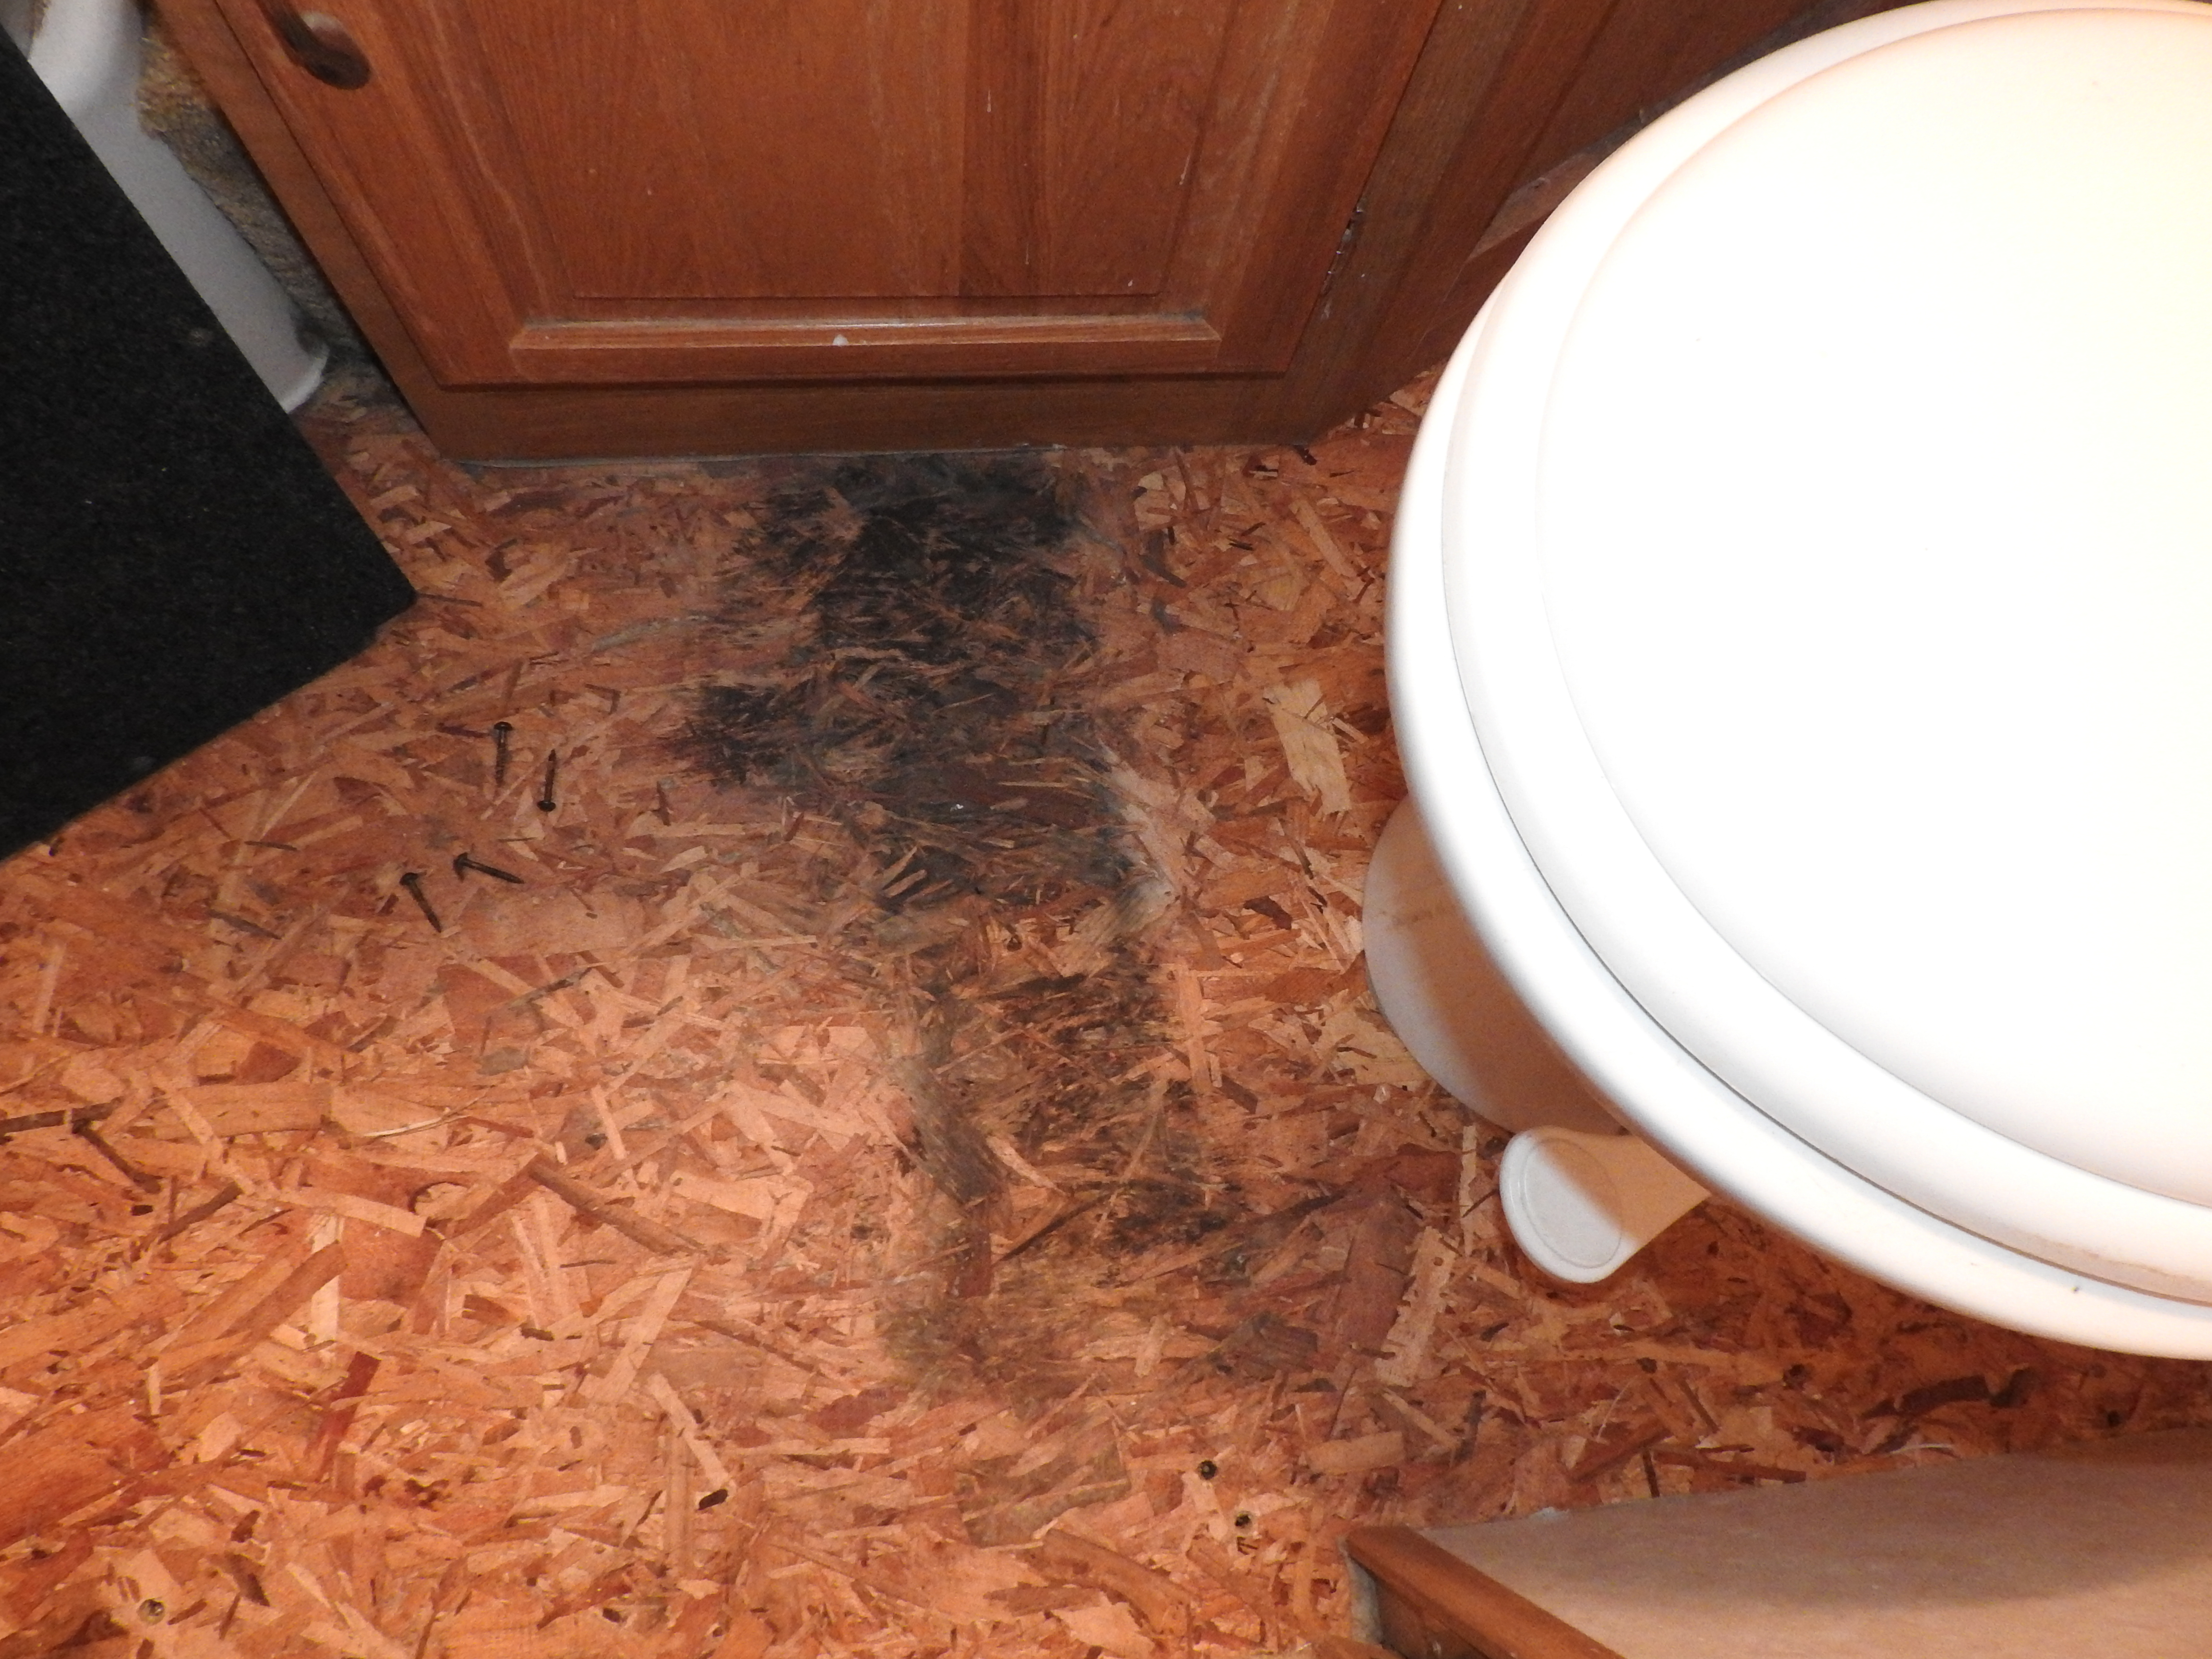 He was dreading it but we decided we should look under the bathroom linoleum too.  There was some rot there as well.